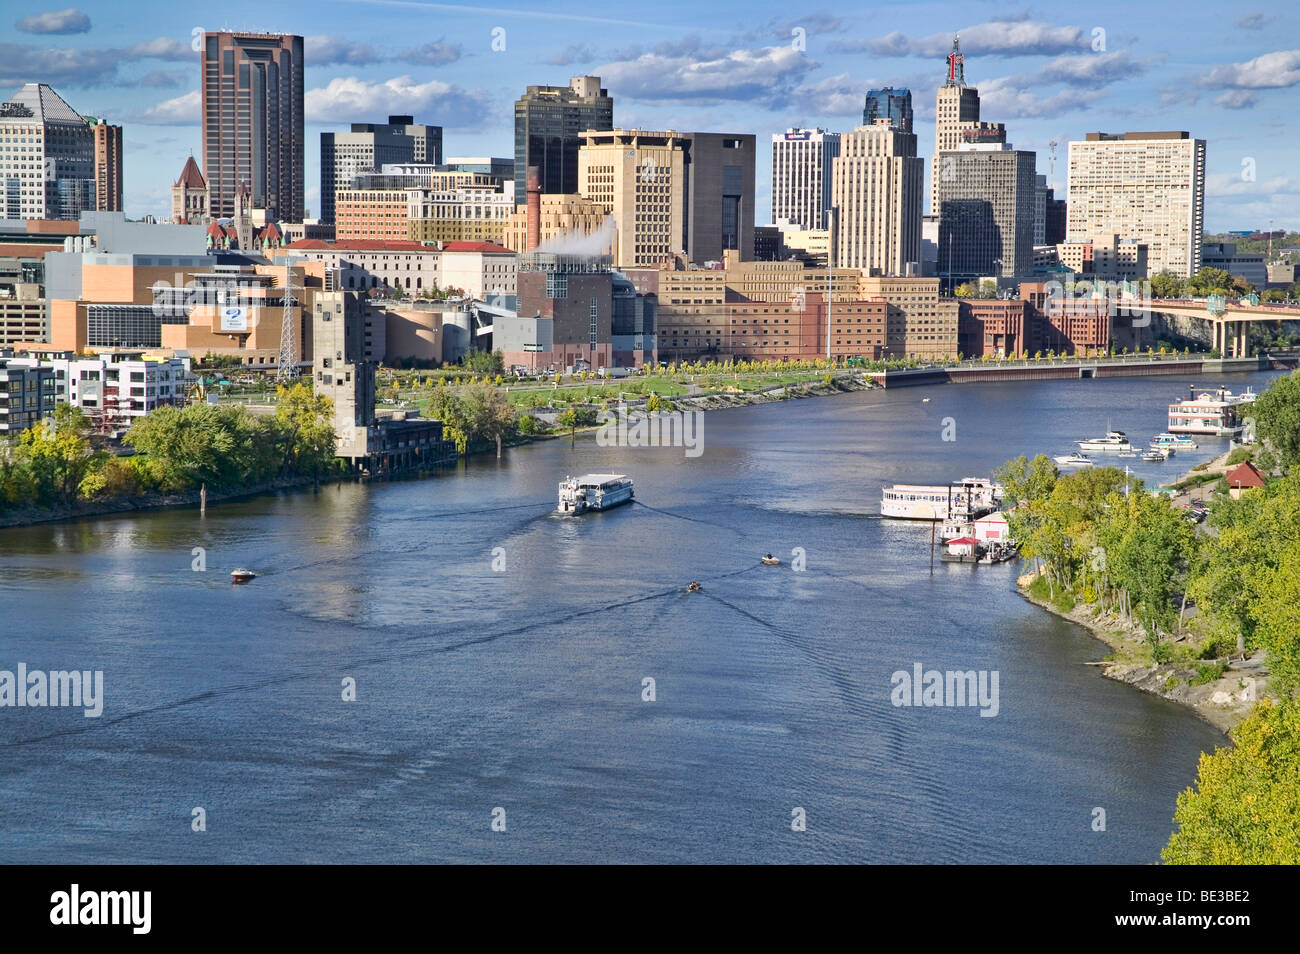 The city of St. Paul is Minnesota's state capitol city. Here river traffic flows along the Mississippi River circa 2006. Stock Photo